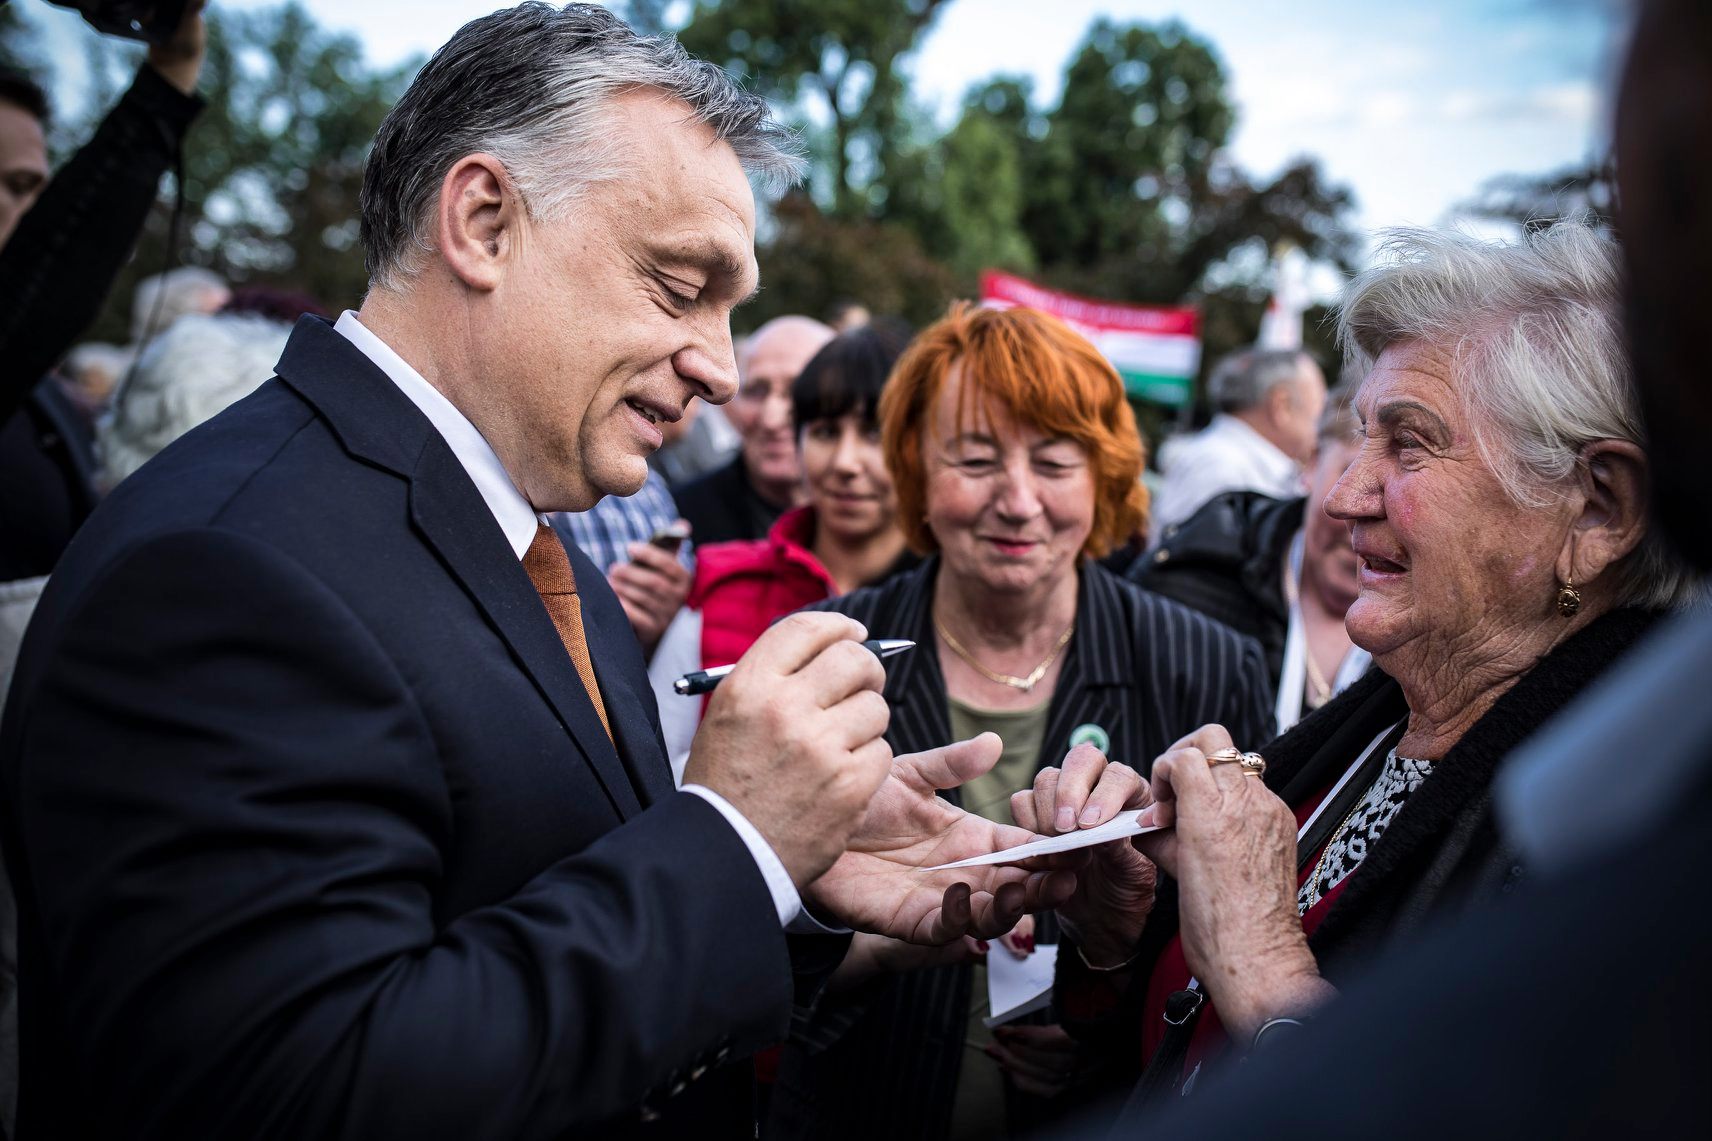 Orbán government pledges generous support for retirees ahead of 2022 general election